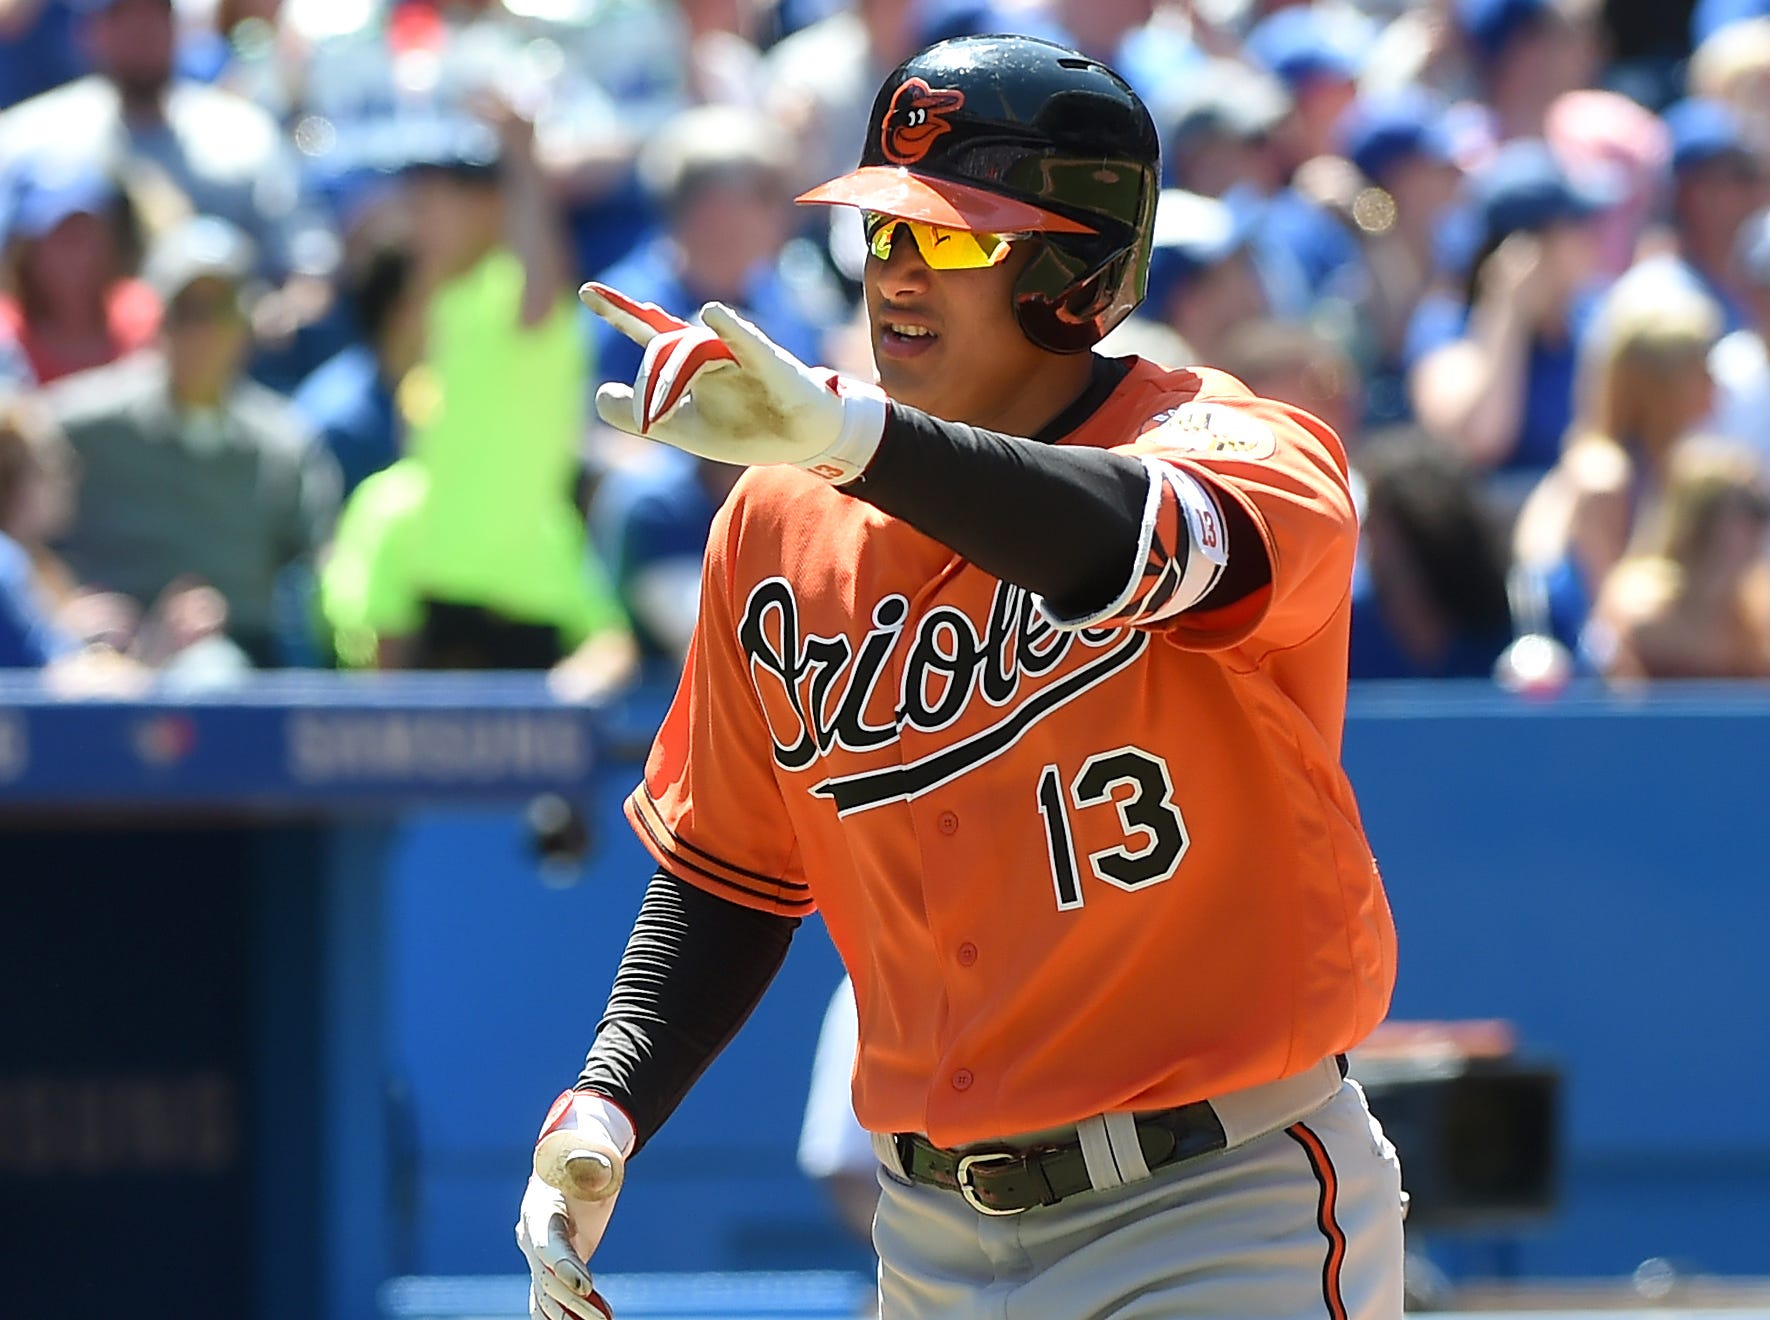 Orioles' Manny Machado enters equation of who's best